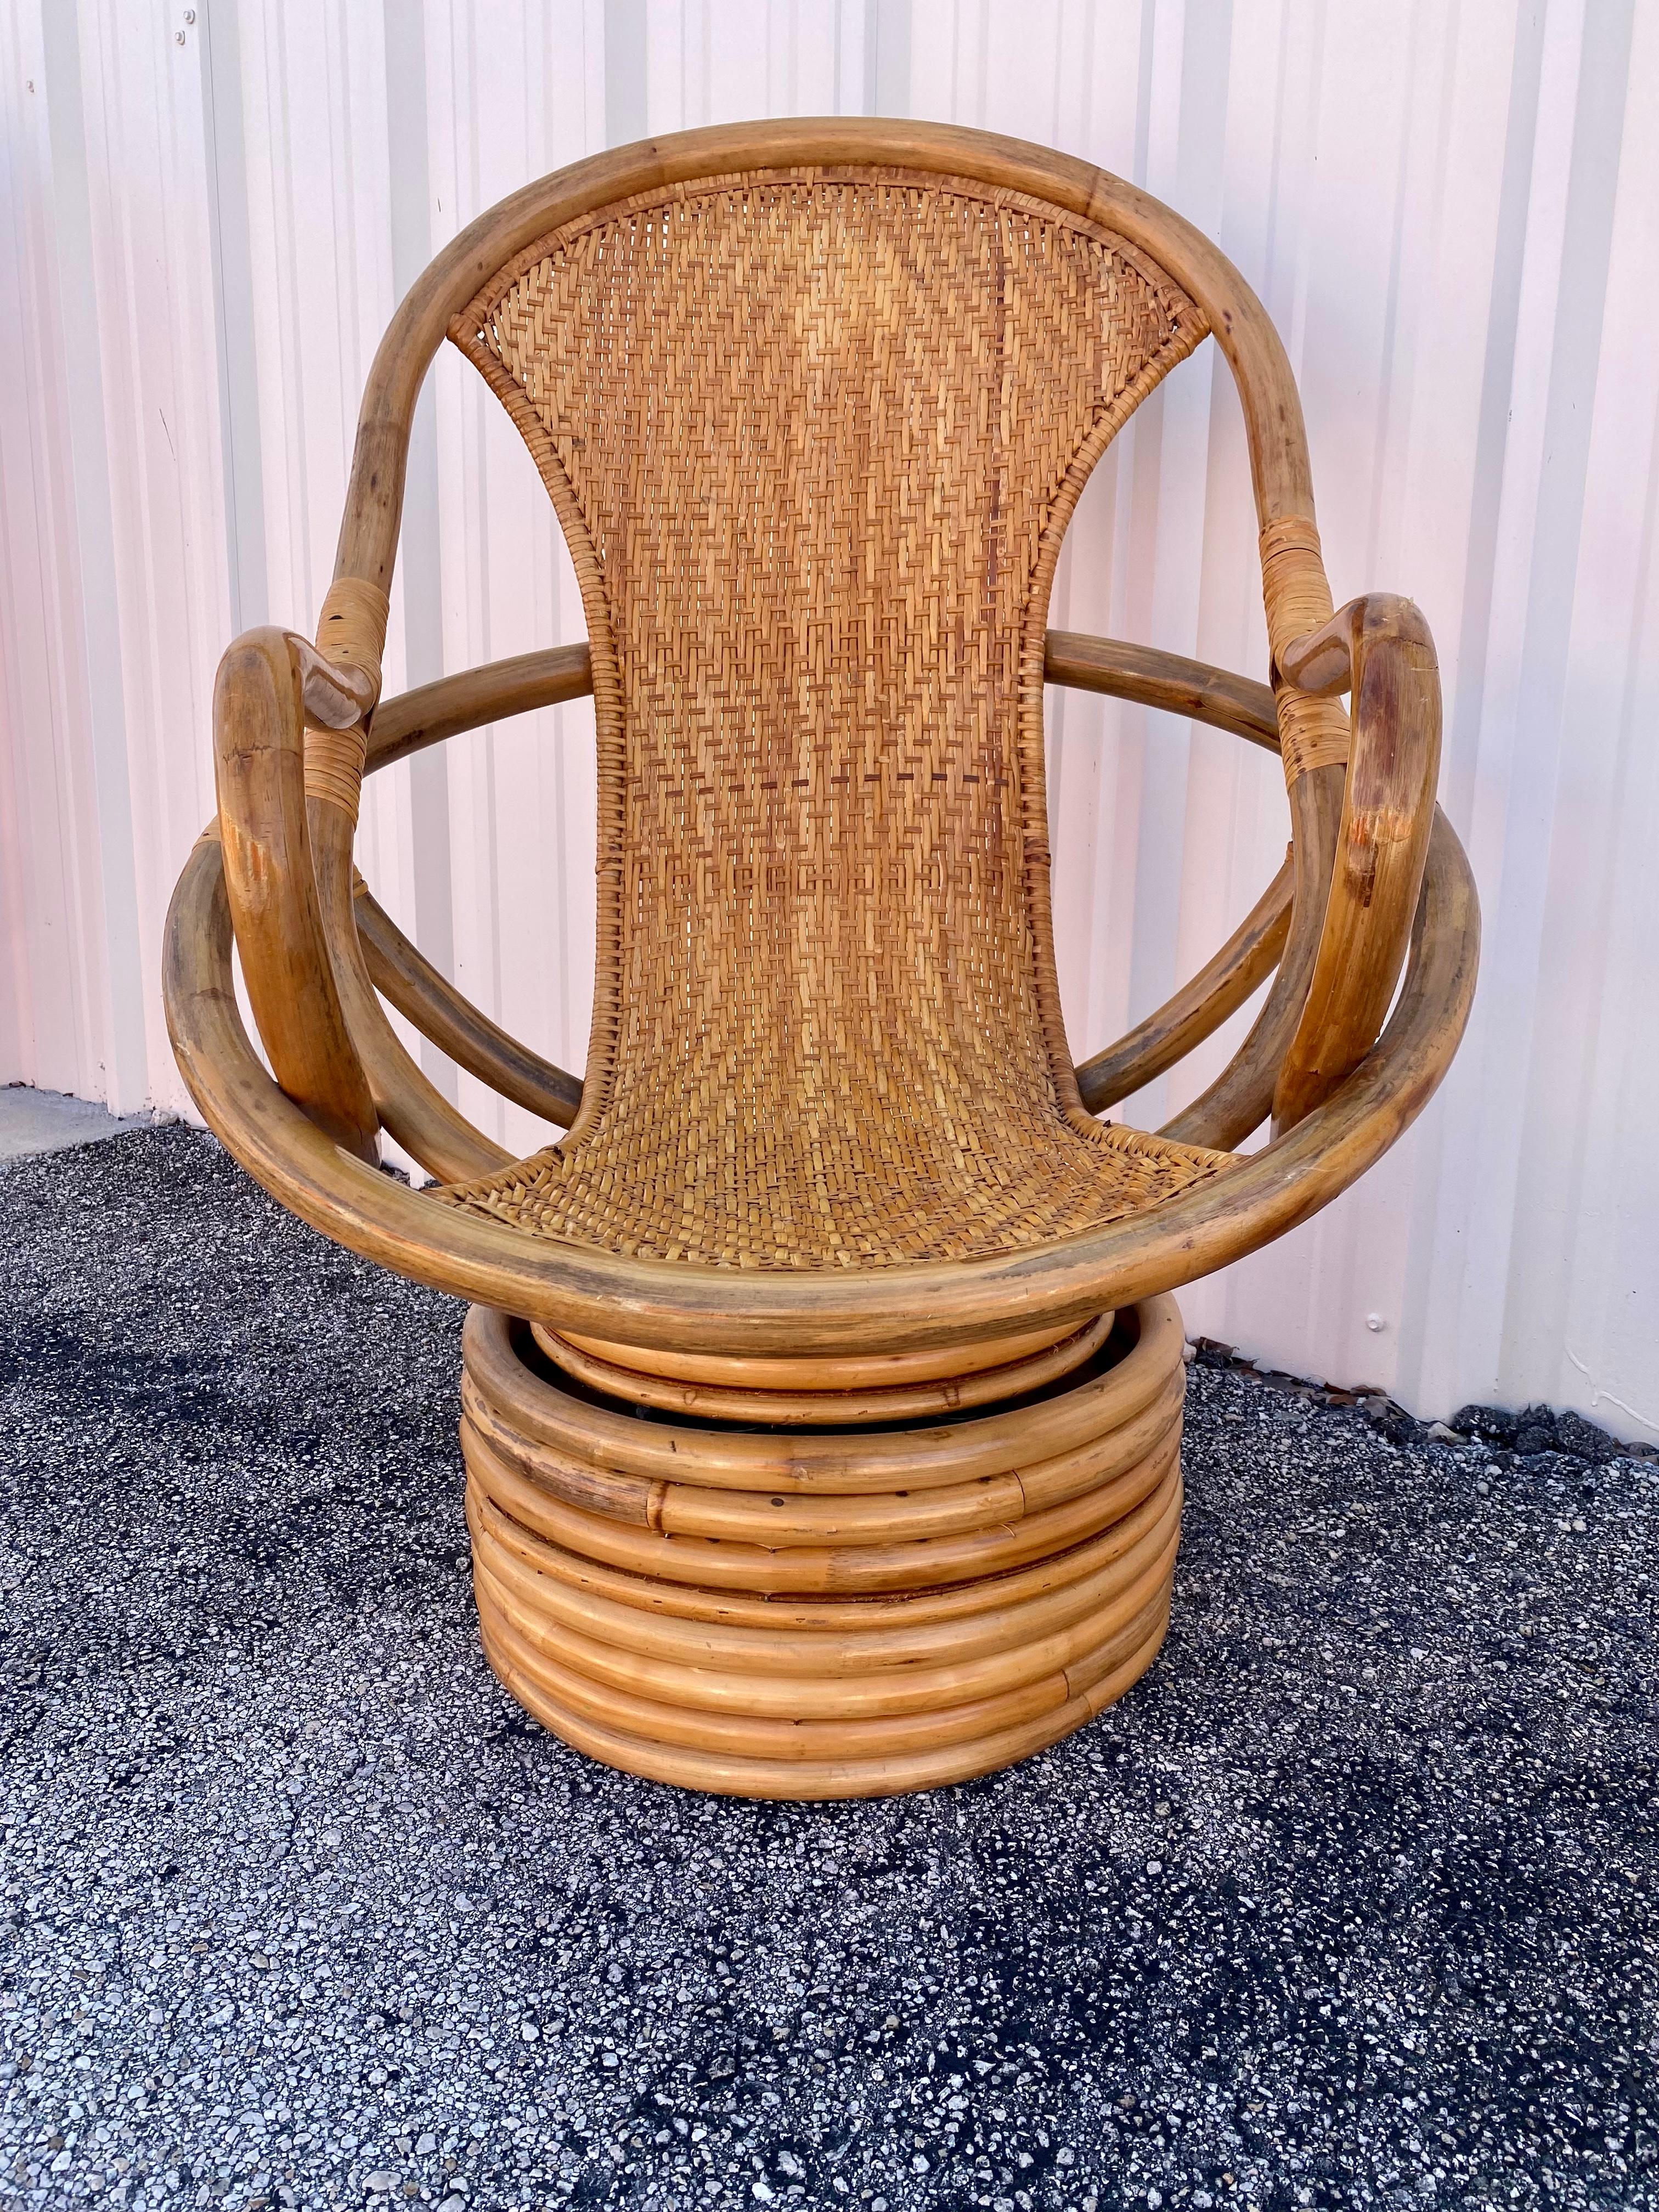 1980s Rattan Coastal Sculptural Swivel Chairs, set of 2 For Sale 3